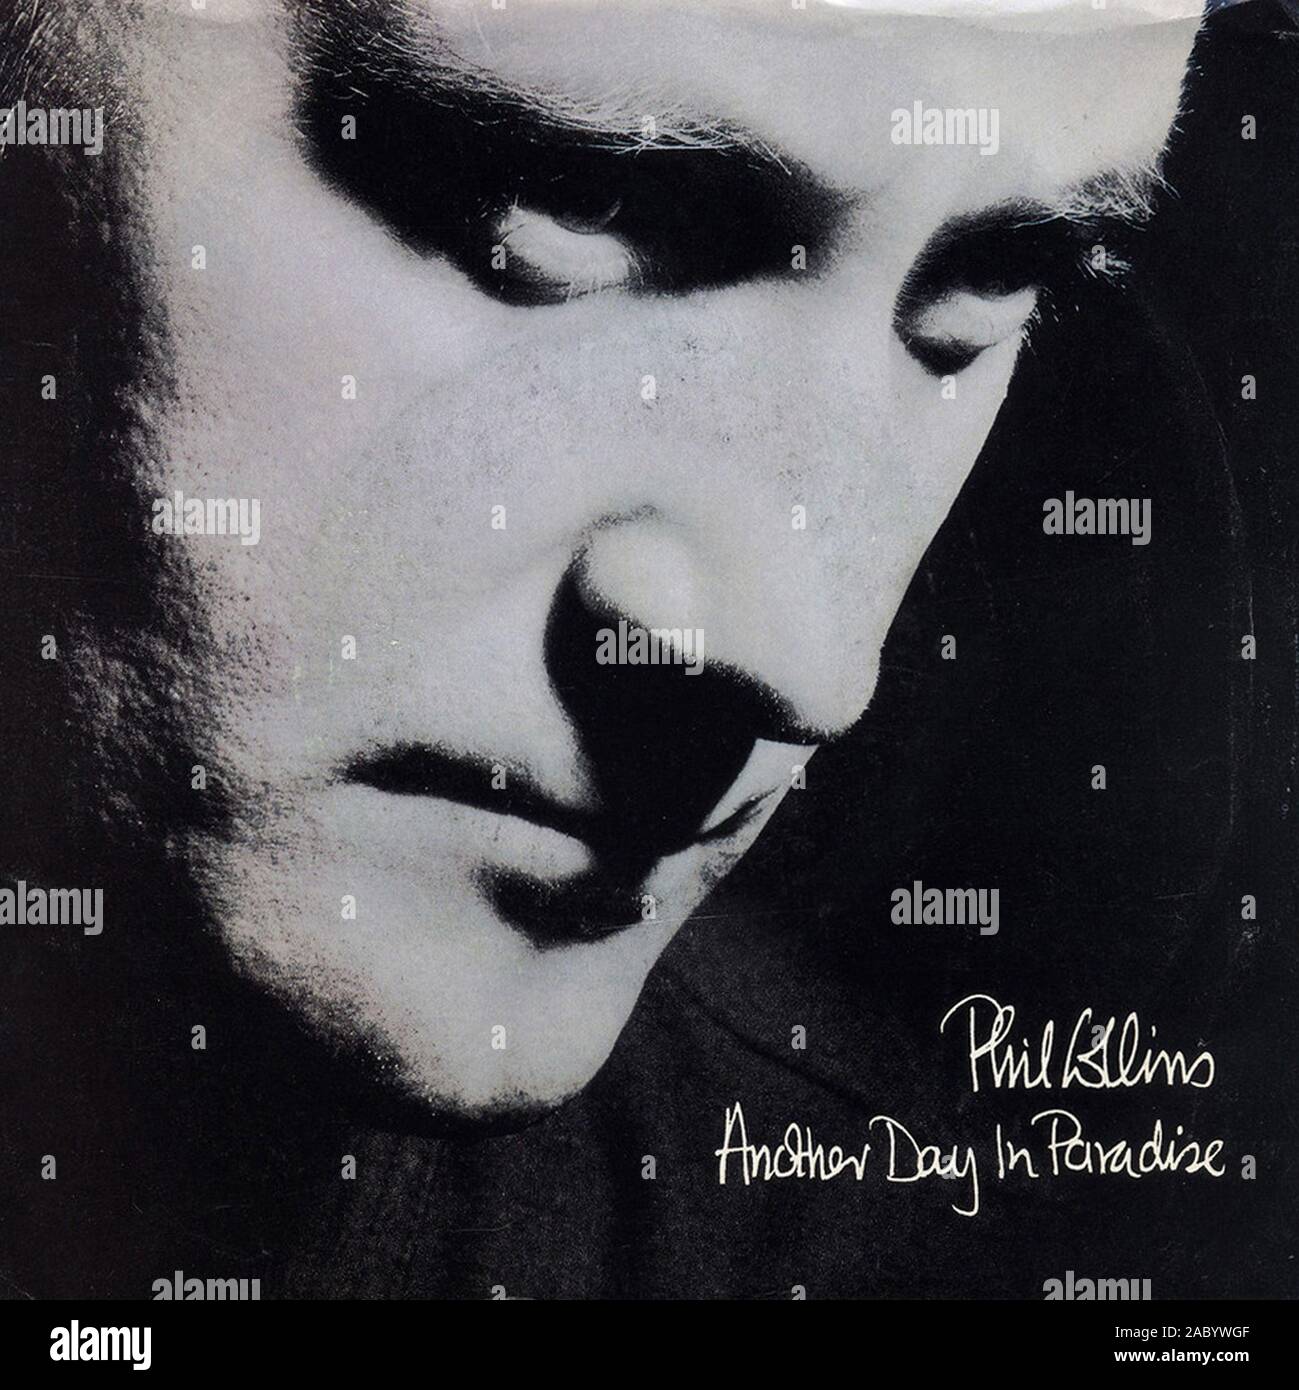 Phil Collins - Another Day In Paradise - Vintage vinyl album cover Stock Photo